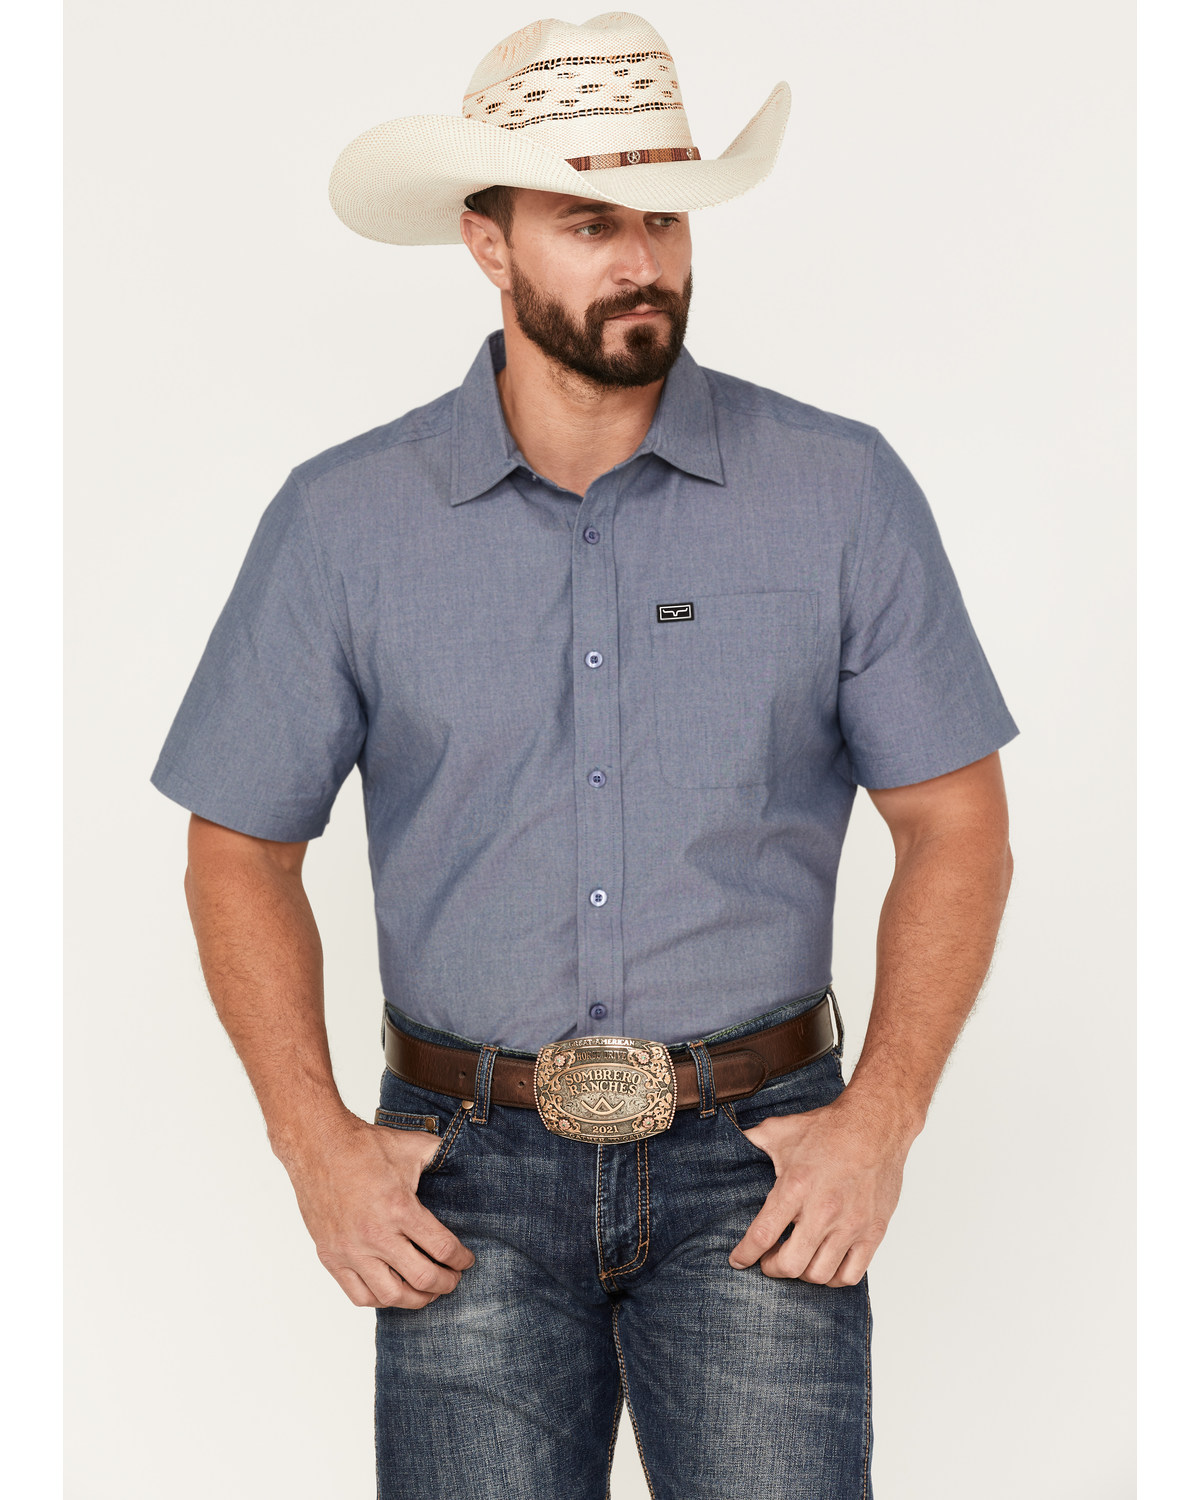 Kimes Ranch Lineville Performance Long Sleeve Button Down Shirt